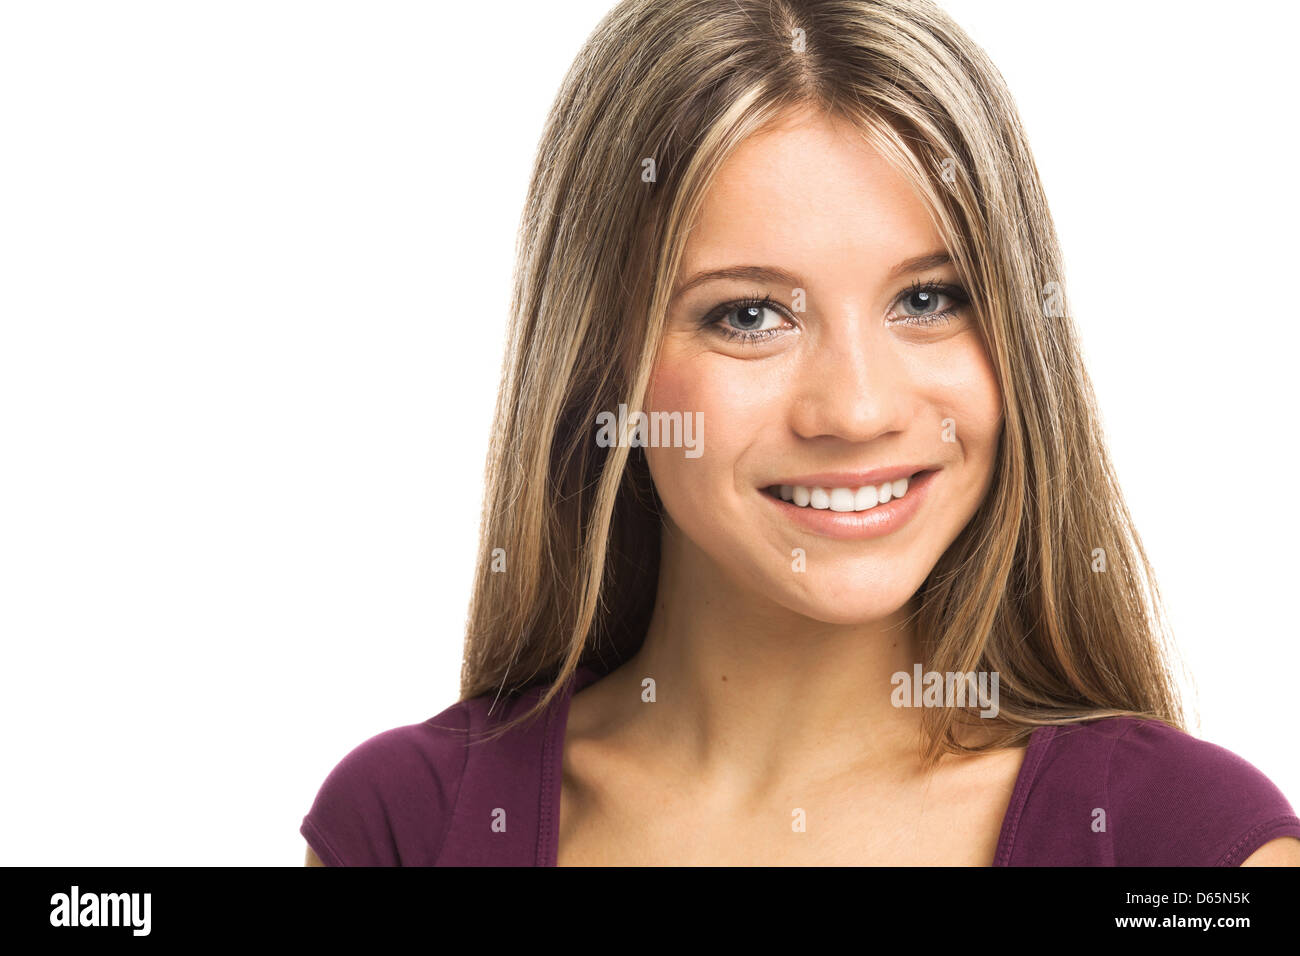 Close up portrait of a beautiful woman smiling, on white Stock Photo